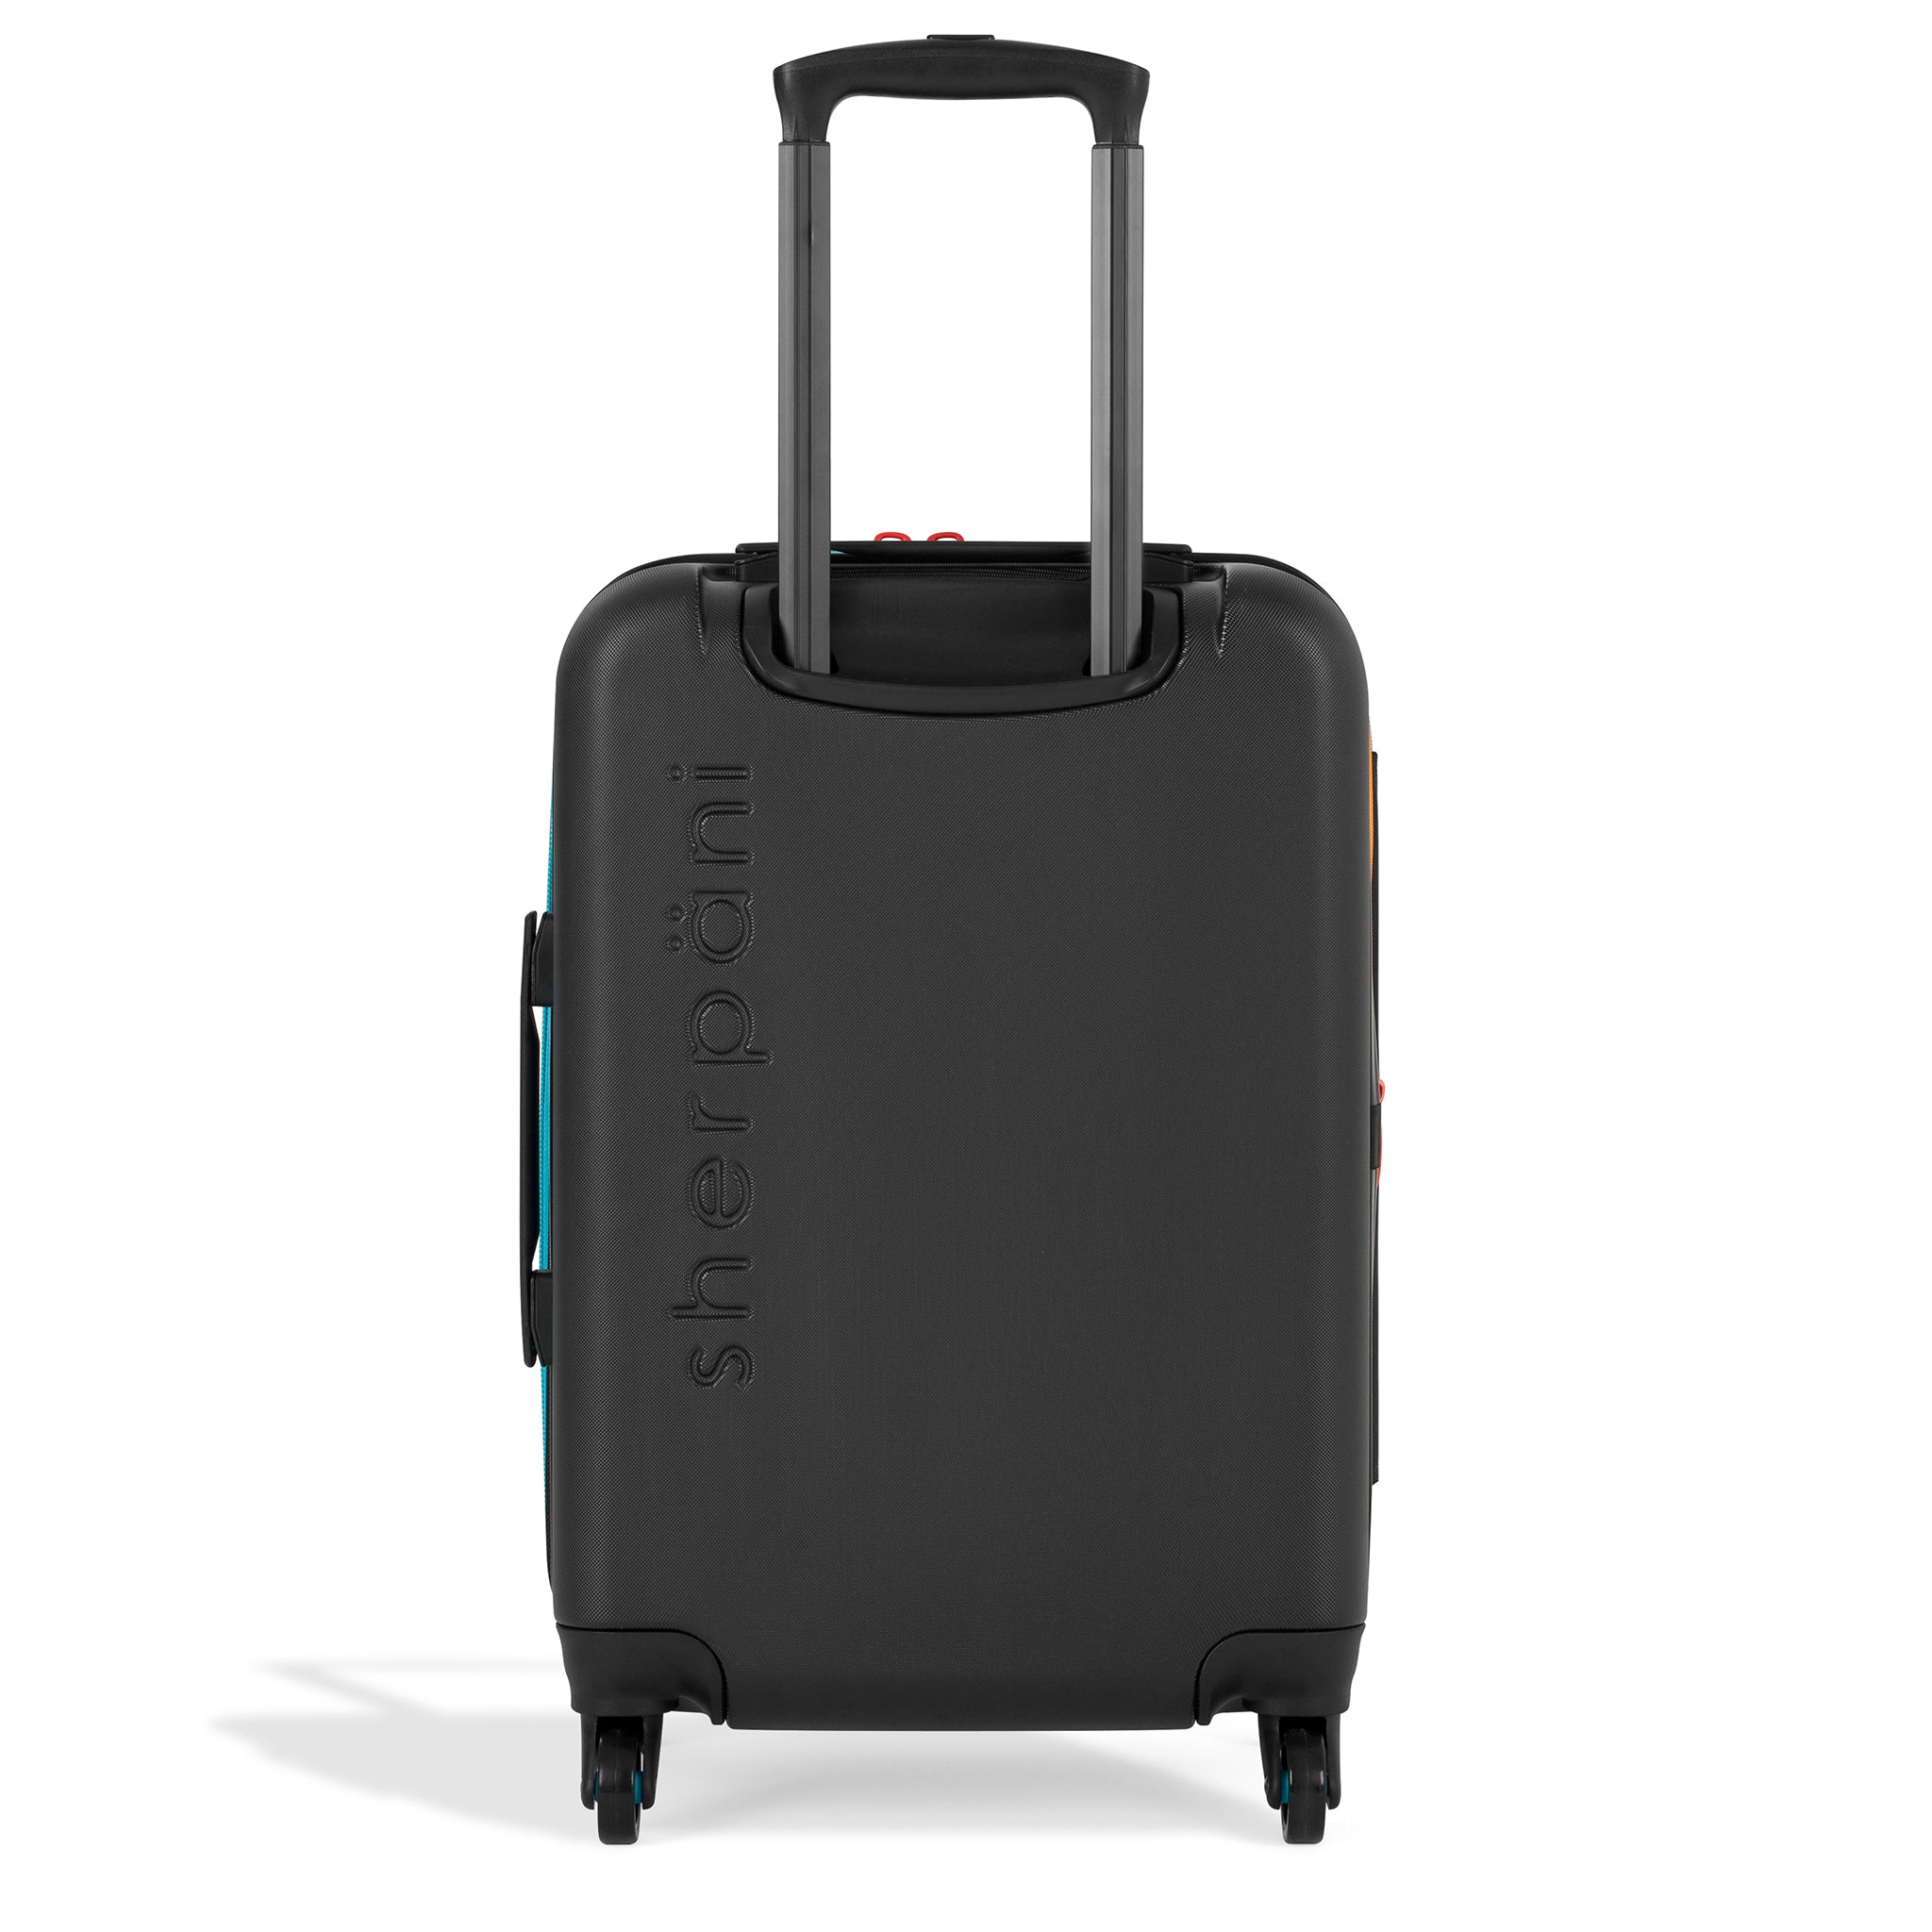 Back view of Sherpani hard-shell luggage the Meridian. Part of Sherpani Travel Carry-on Bundle in Cool Chromatic.